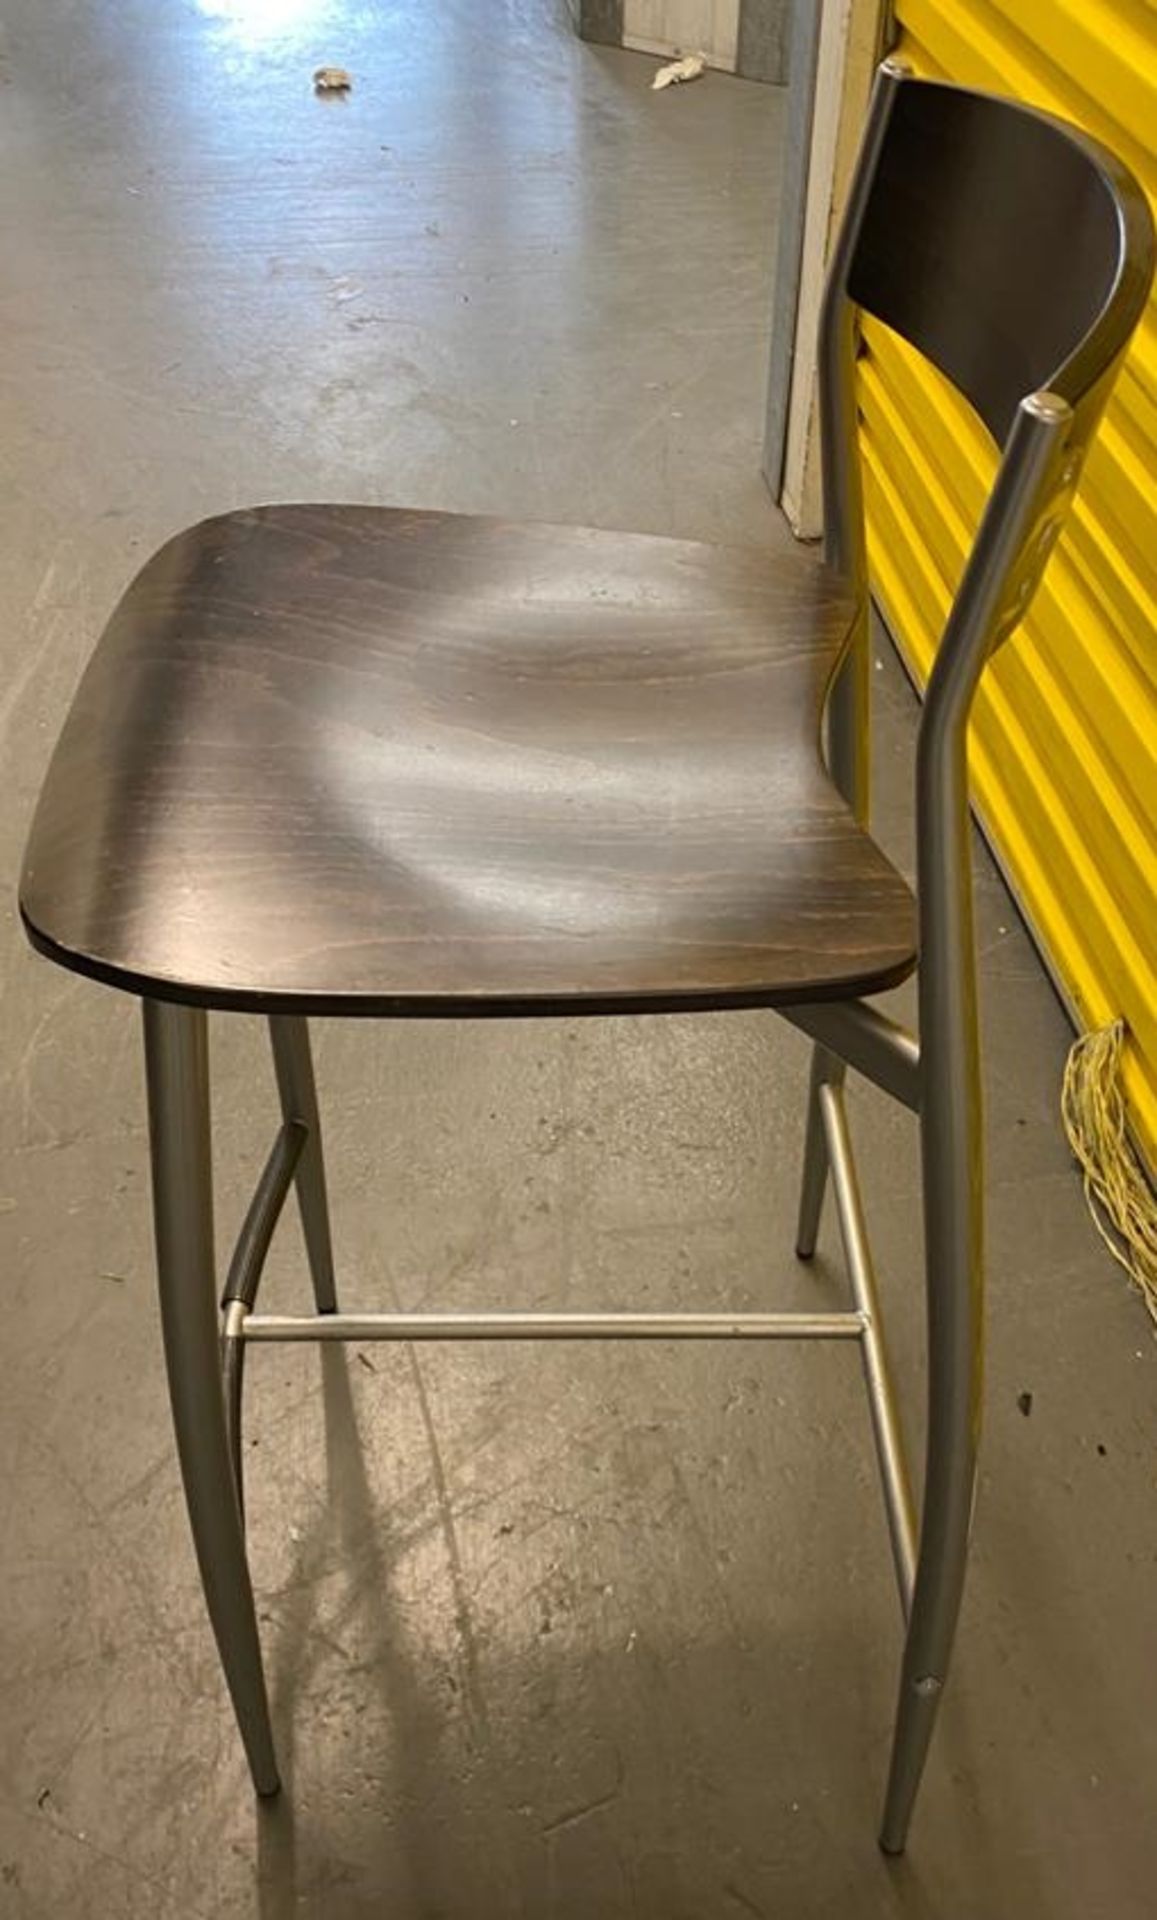 4 x Altek Bar Stools - Made in Italy - Supplied in Dark Wood - CL667 - Location: Brighton, Sussex, - Image 6 of 6